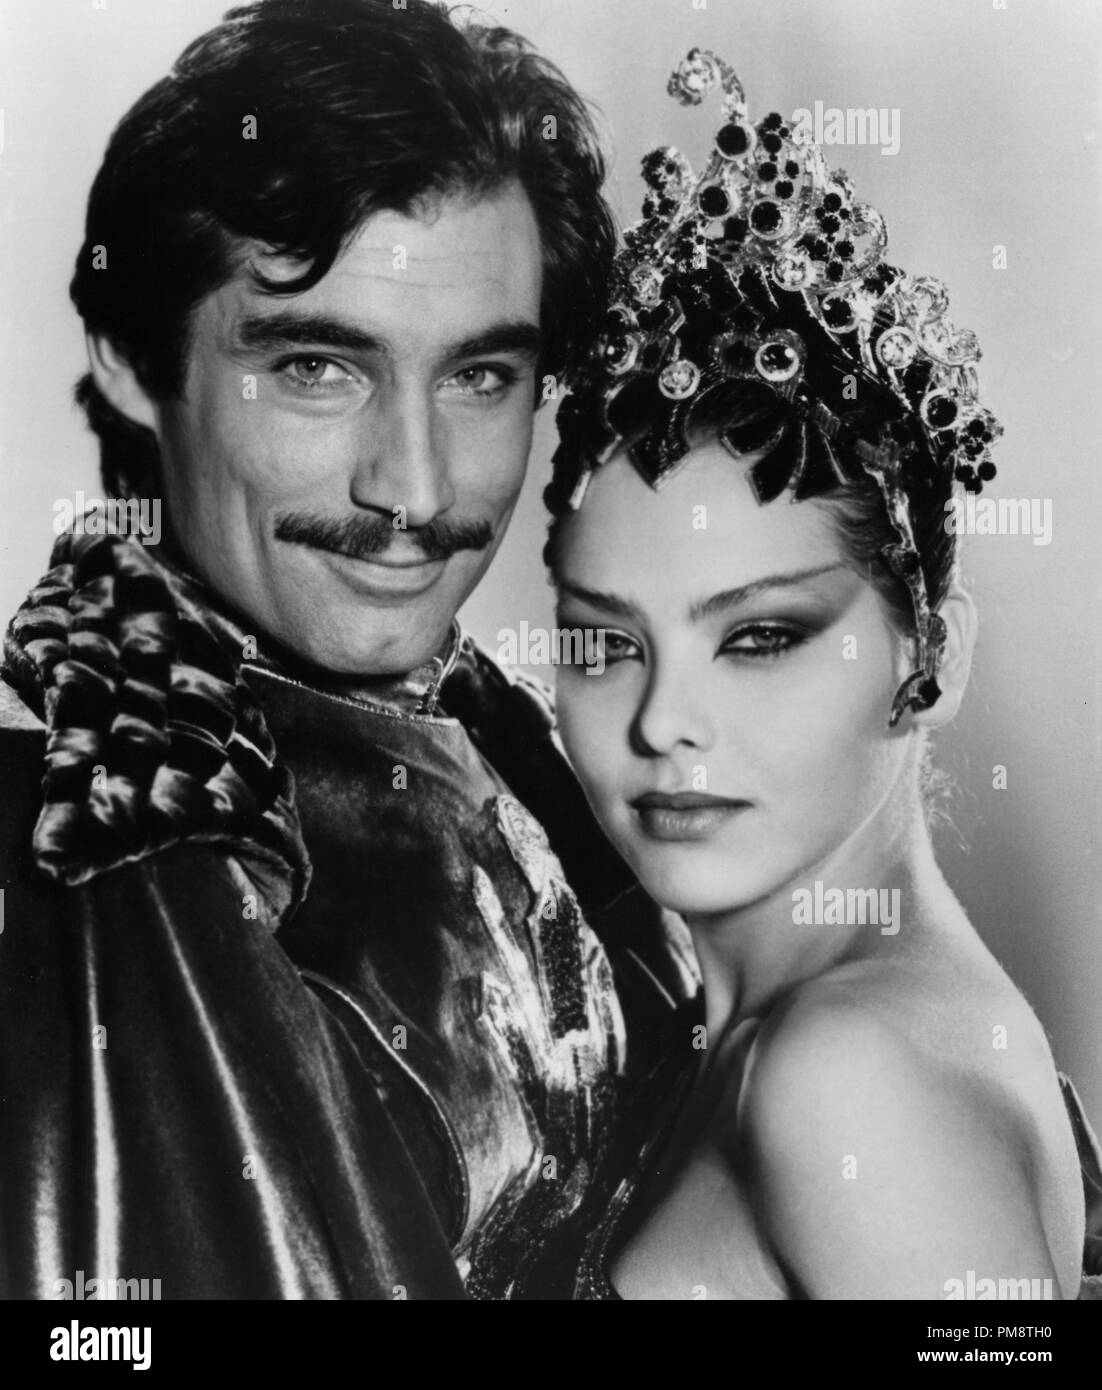 Studio Publicity Still from 'Flash Gordon' Timothy Dalton, Ornella Muti © 1980 Universal All Rights Reserved   File Reference # 31715229THA  For Editorial Use Only Stock Photo